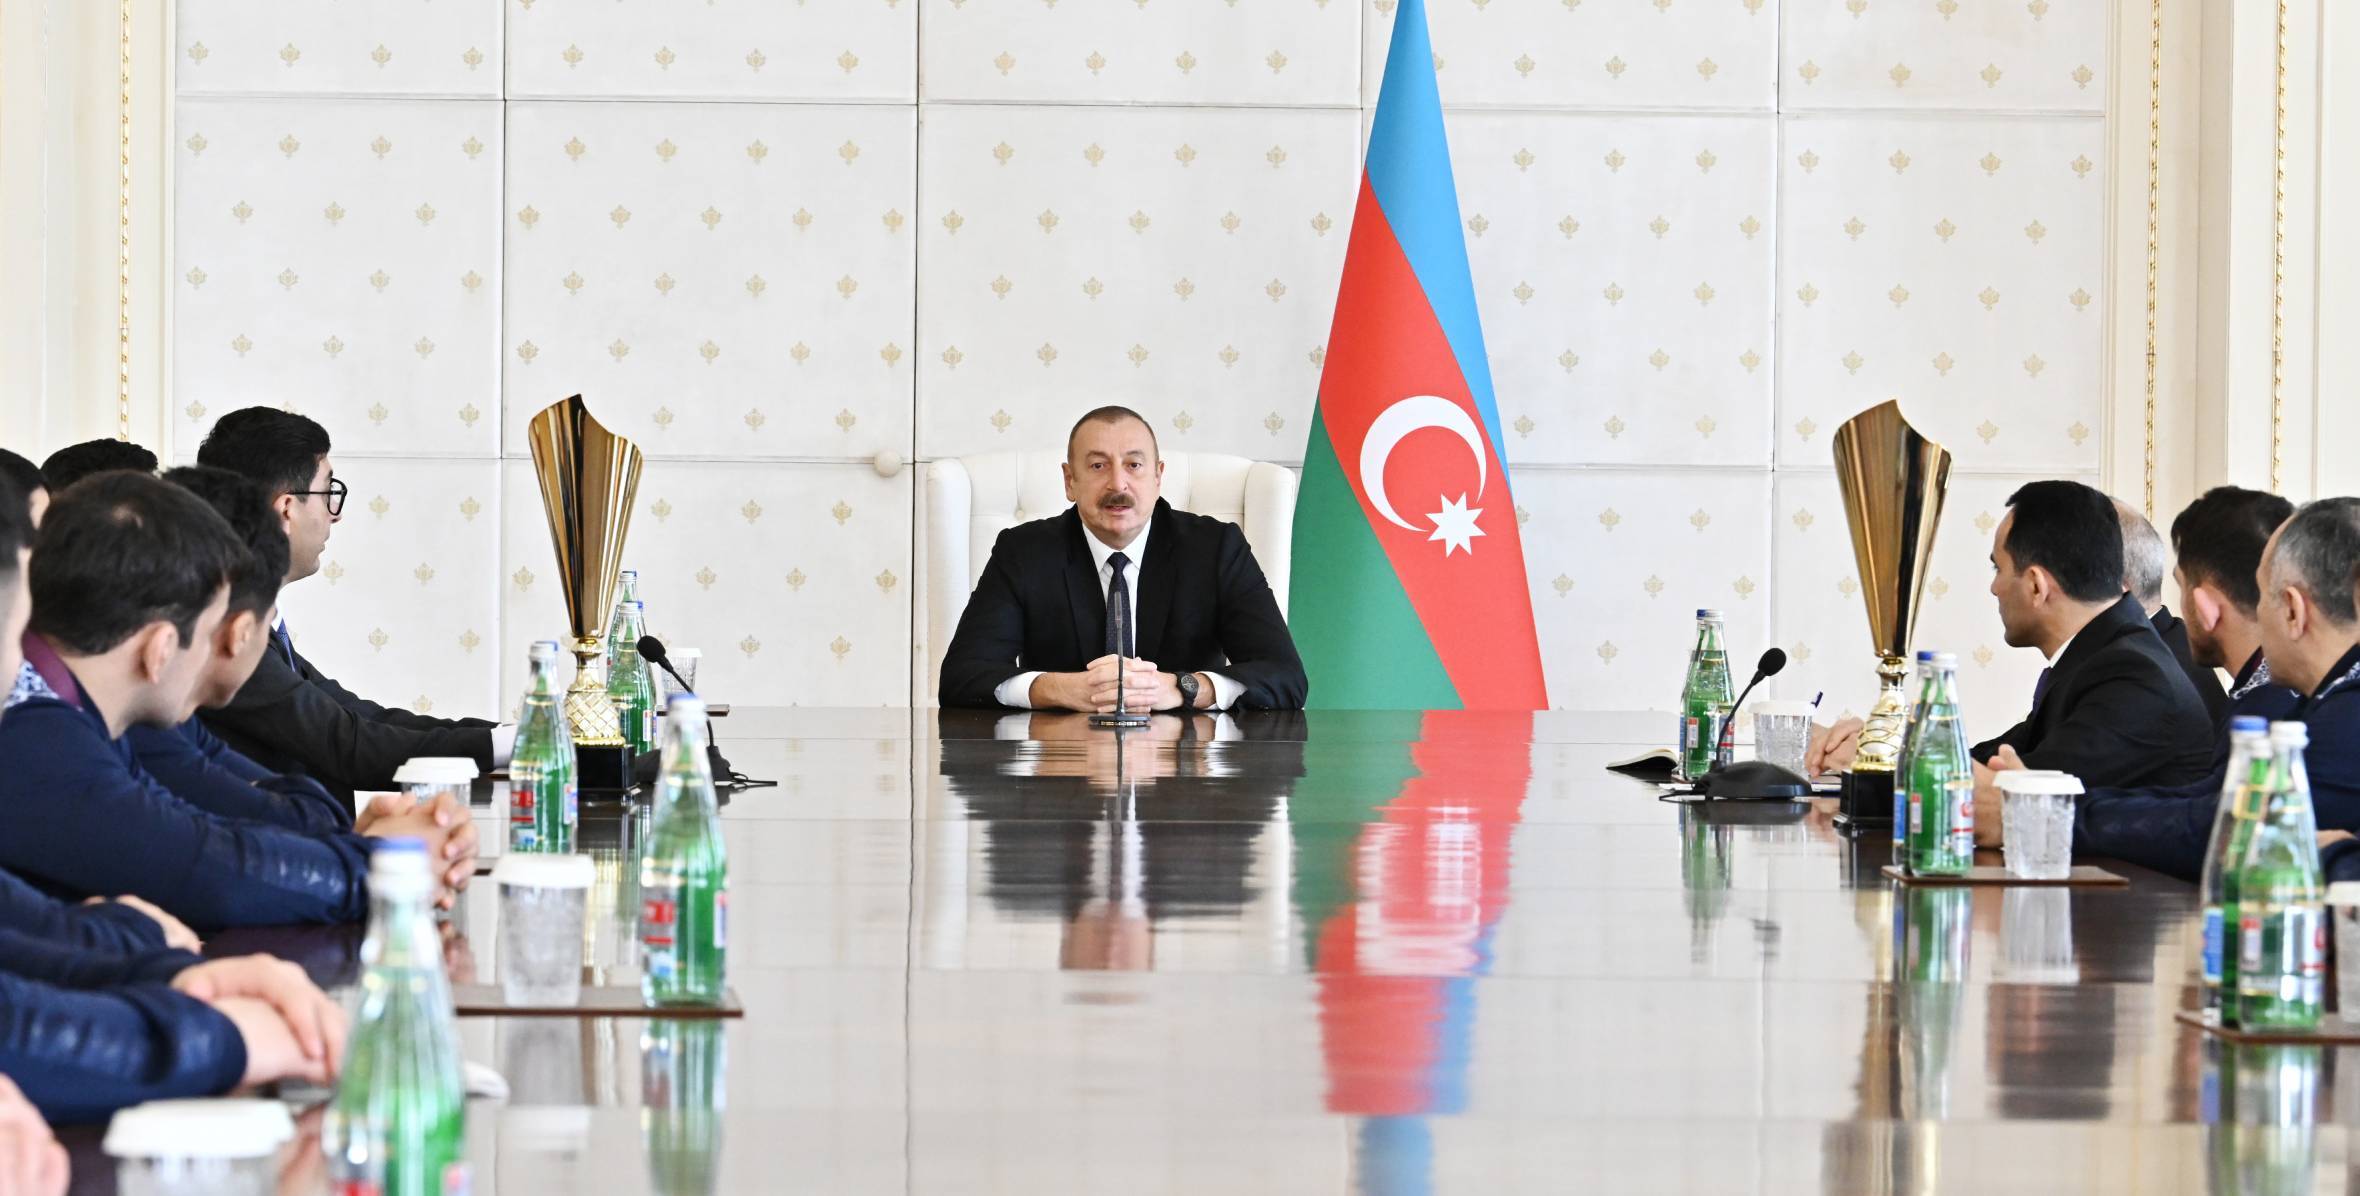 Speech by Ilham Aliyev at the reception of Azerbaijani national team participating in European Wrestling Championships in Hungary